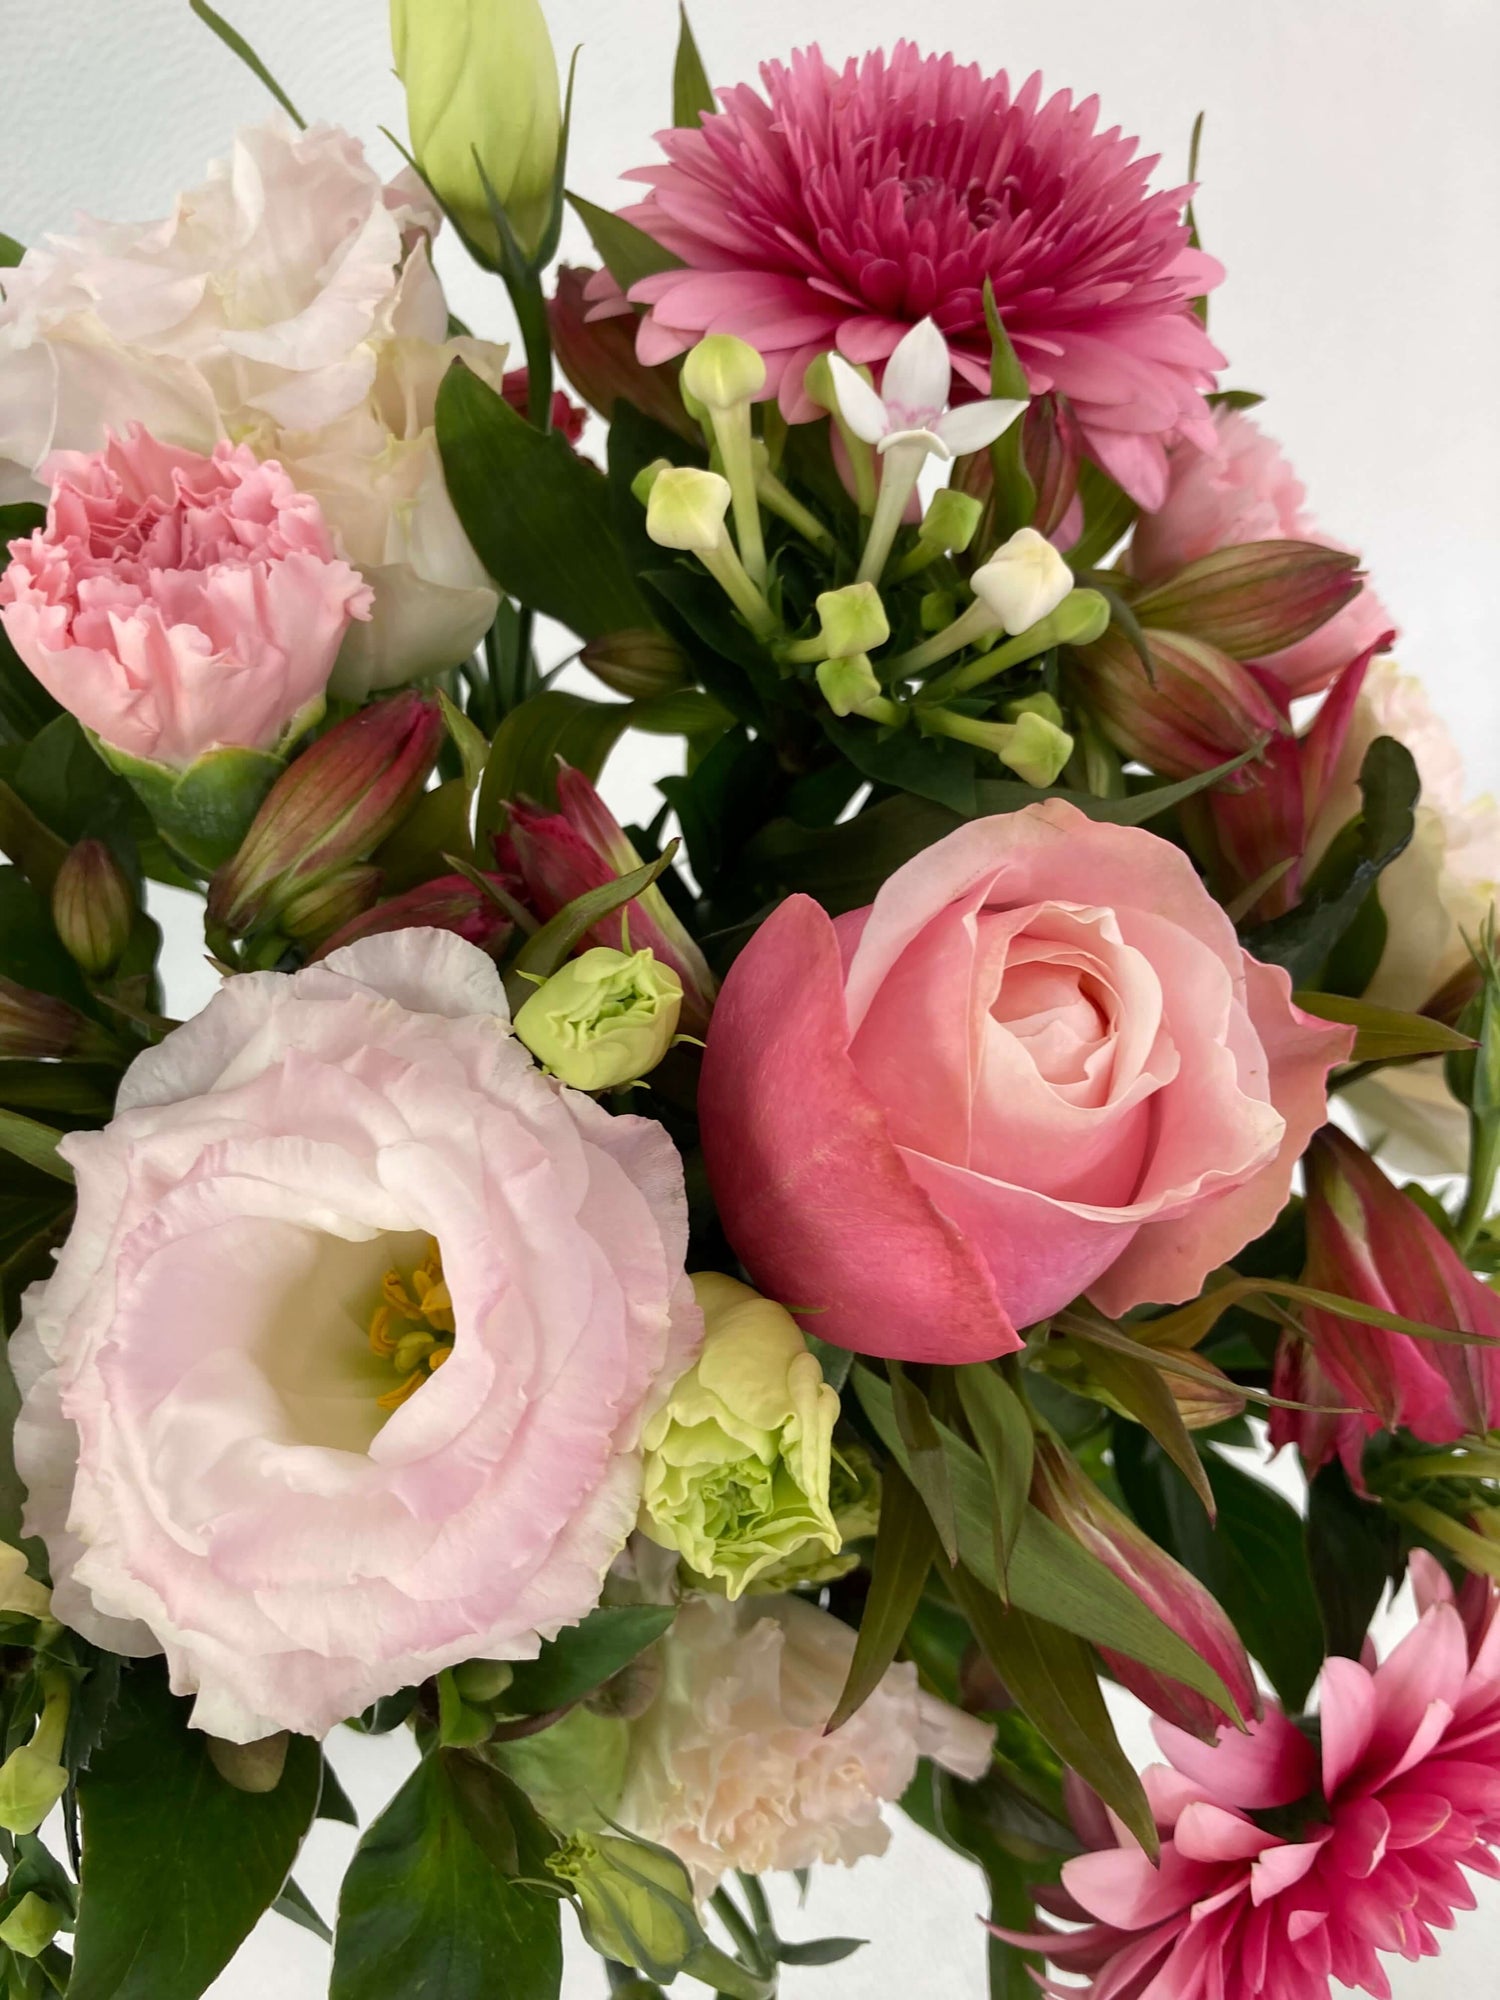 We use pink roses in our thank you arrangements because they signify thankfulness.